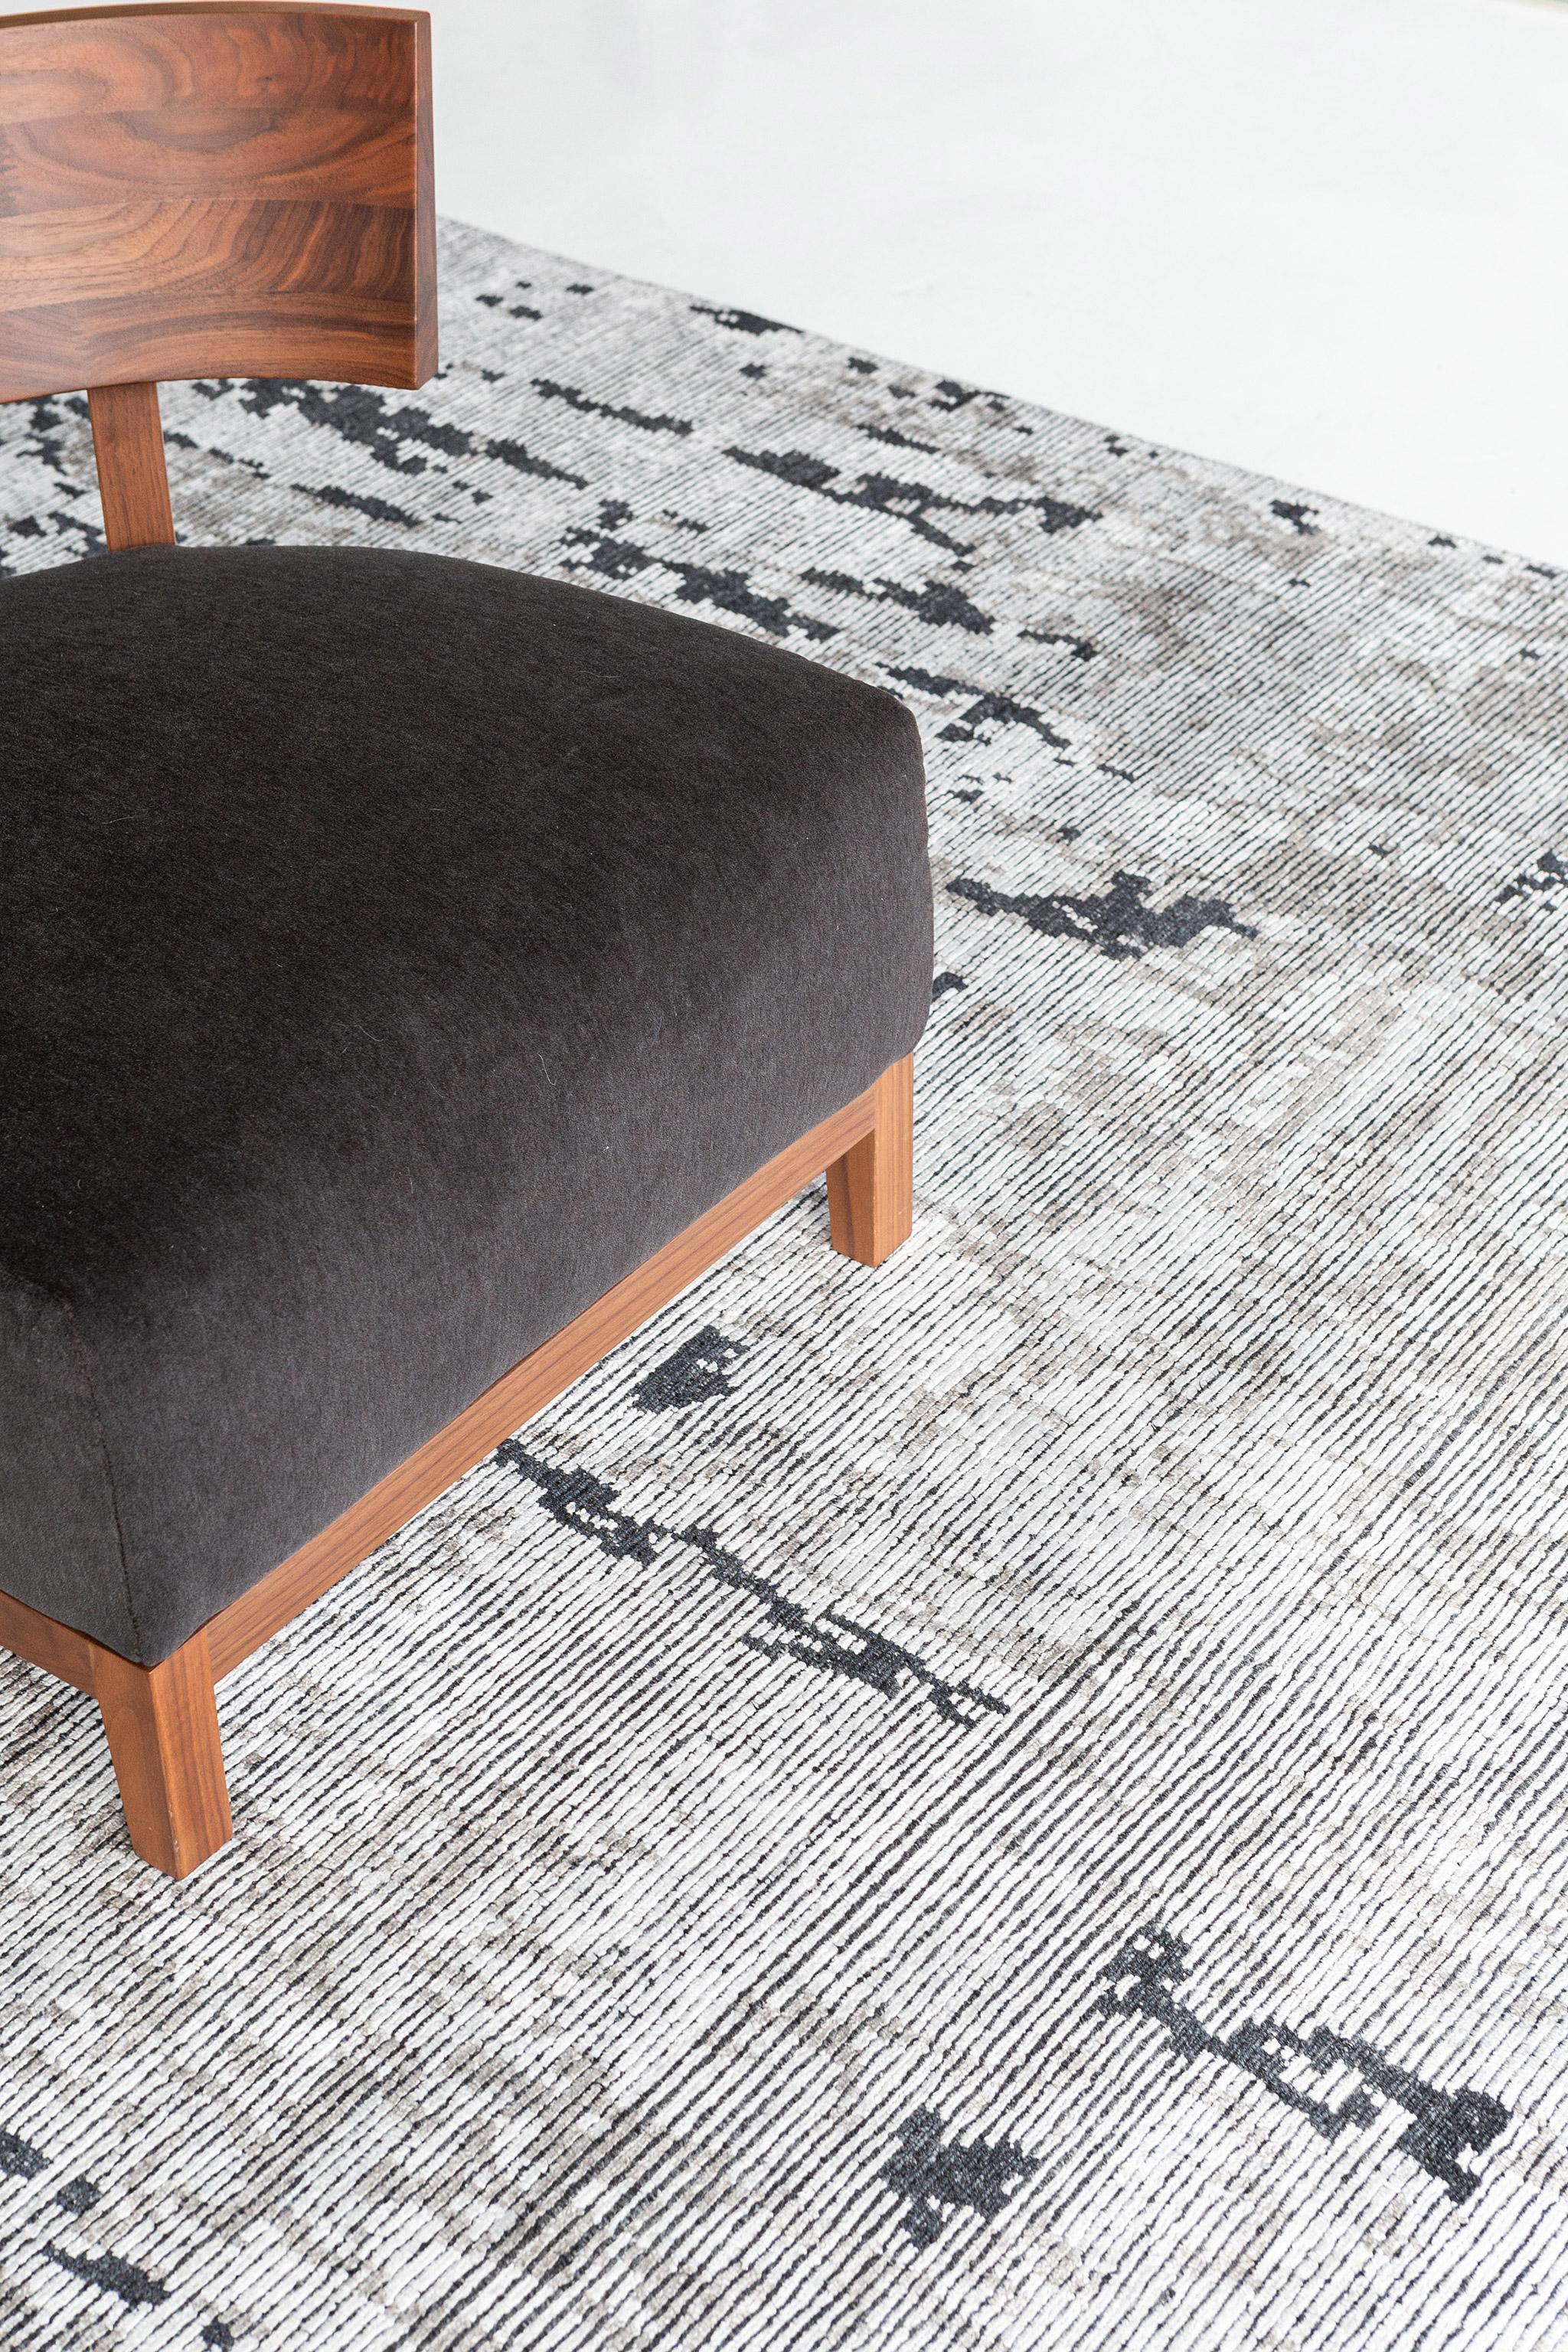 This eccentric Modern Design Bamboo Silk Ribbed rug conjures up the spirit of Bohemia, with its black and gray dominant colors. It is just as trendy and refined at the same time, perfect for any connoisseur of a fine lifestyle.

Rug